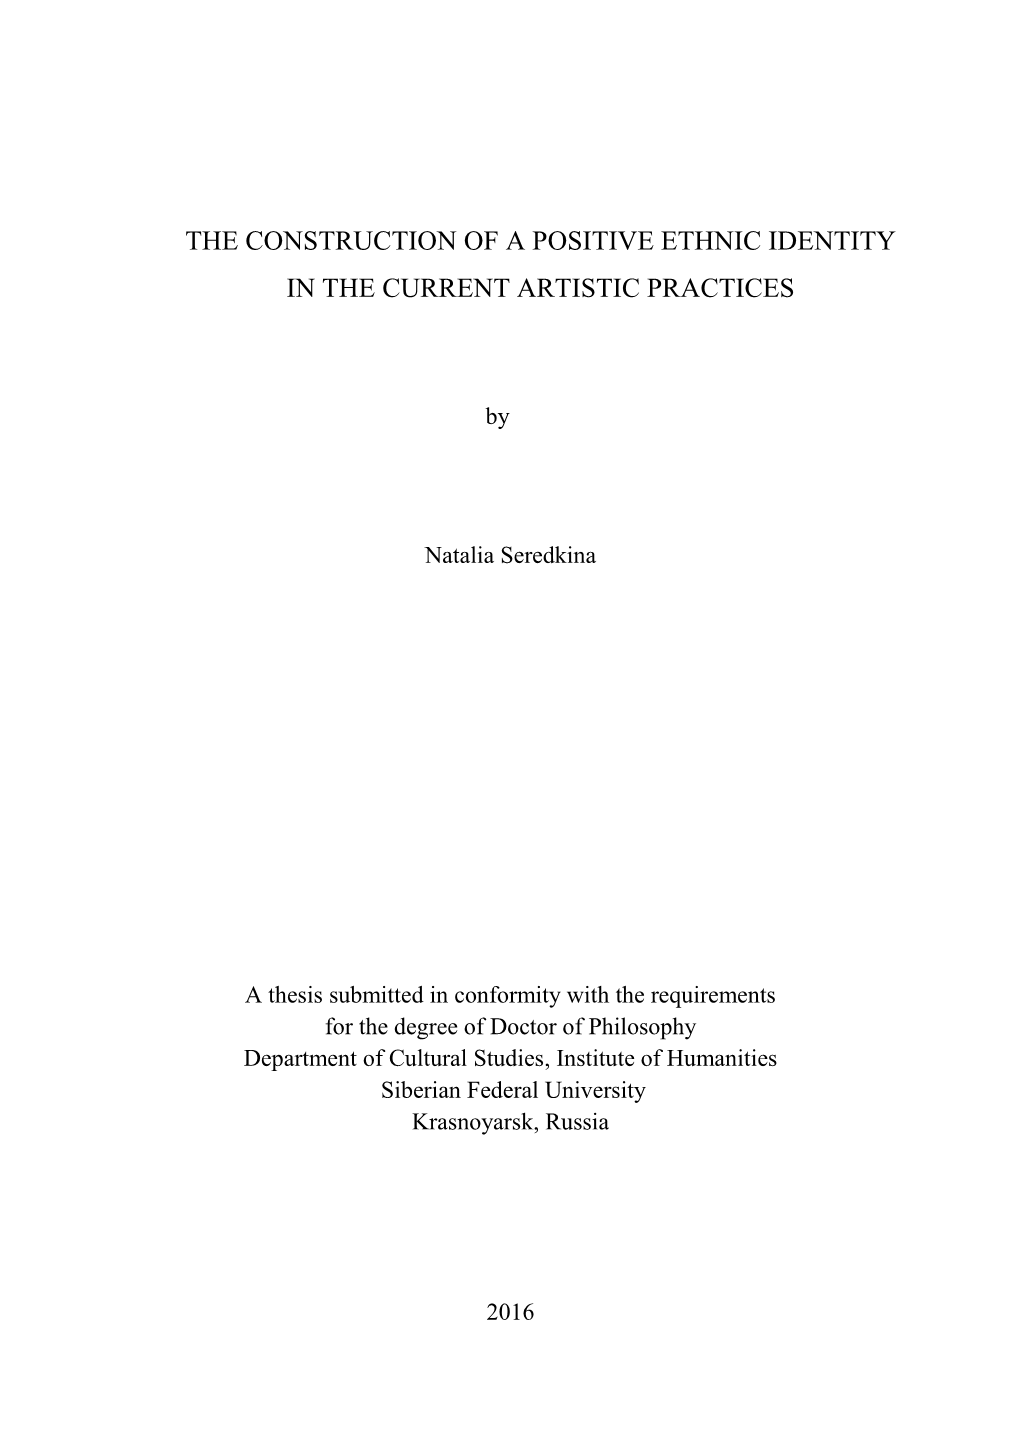 The Construction of a Positive Ethnic Identity in the Current Artistic Practices